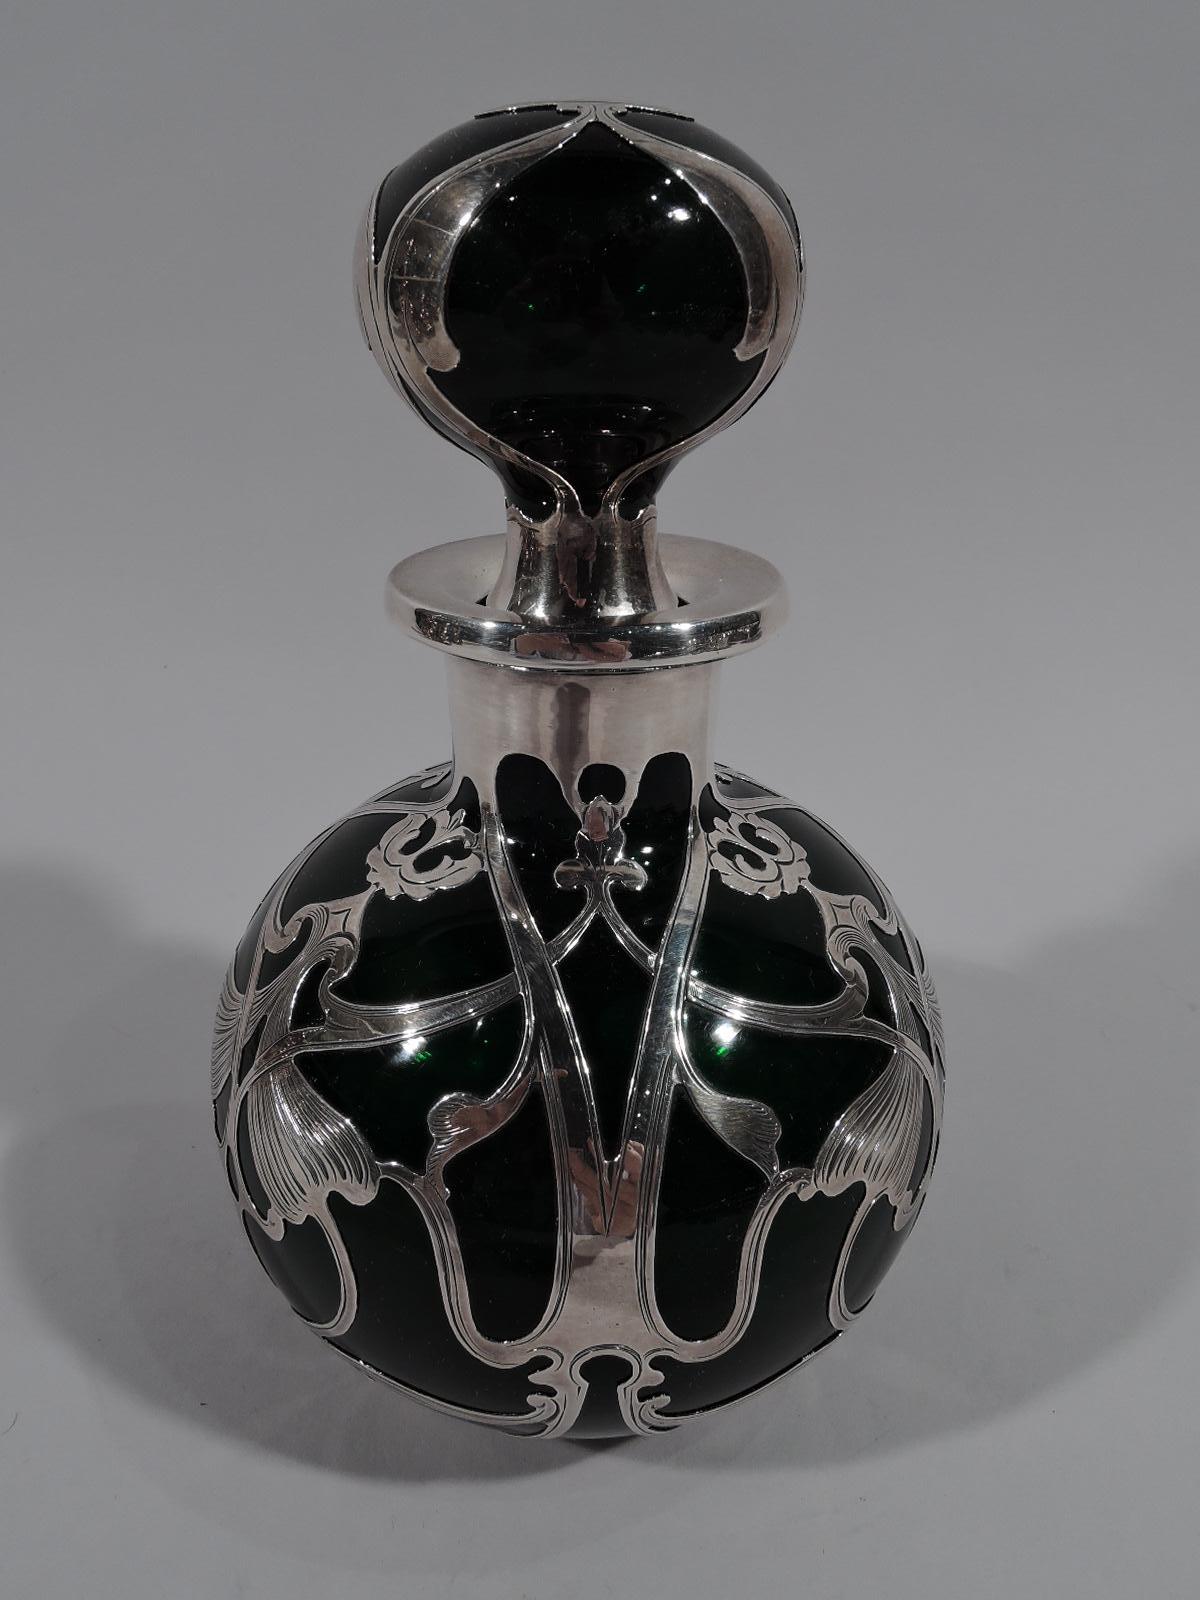 Large turn of the century Art Nouveau green glass perfume with engraved silver overlay. Made by Gorham in Providence. Globular with everted rim. Ball stopper with short plug. Loose and interlaced silver scrollwork with flower heads in open and